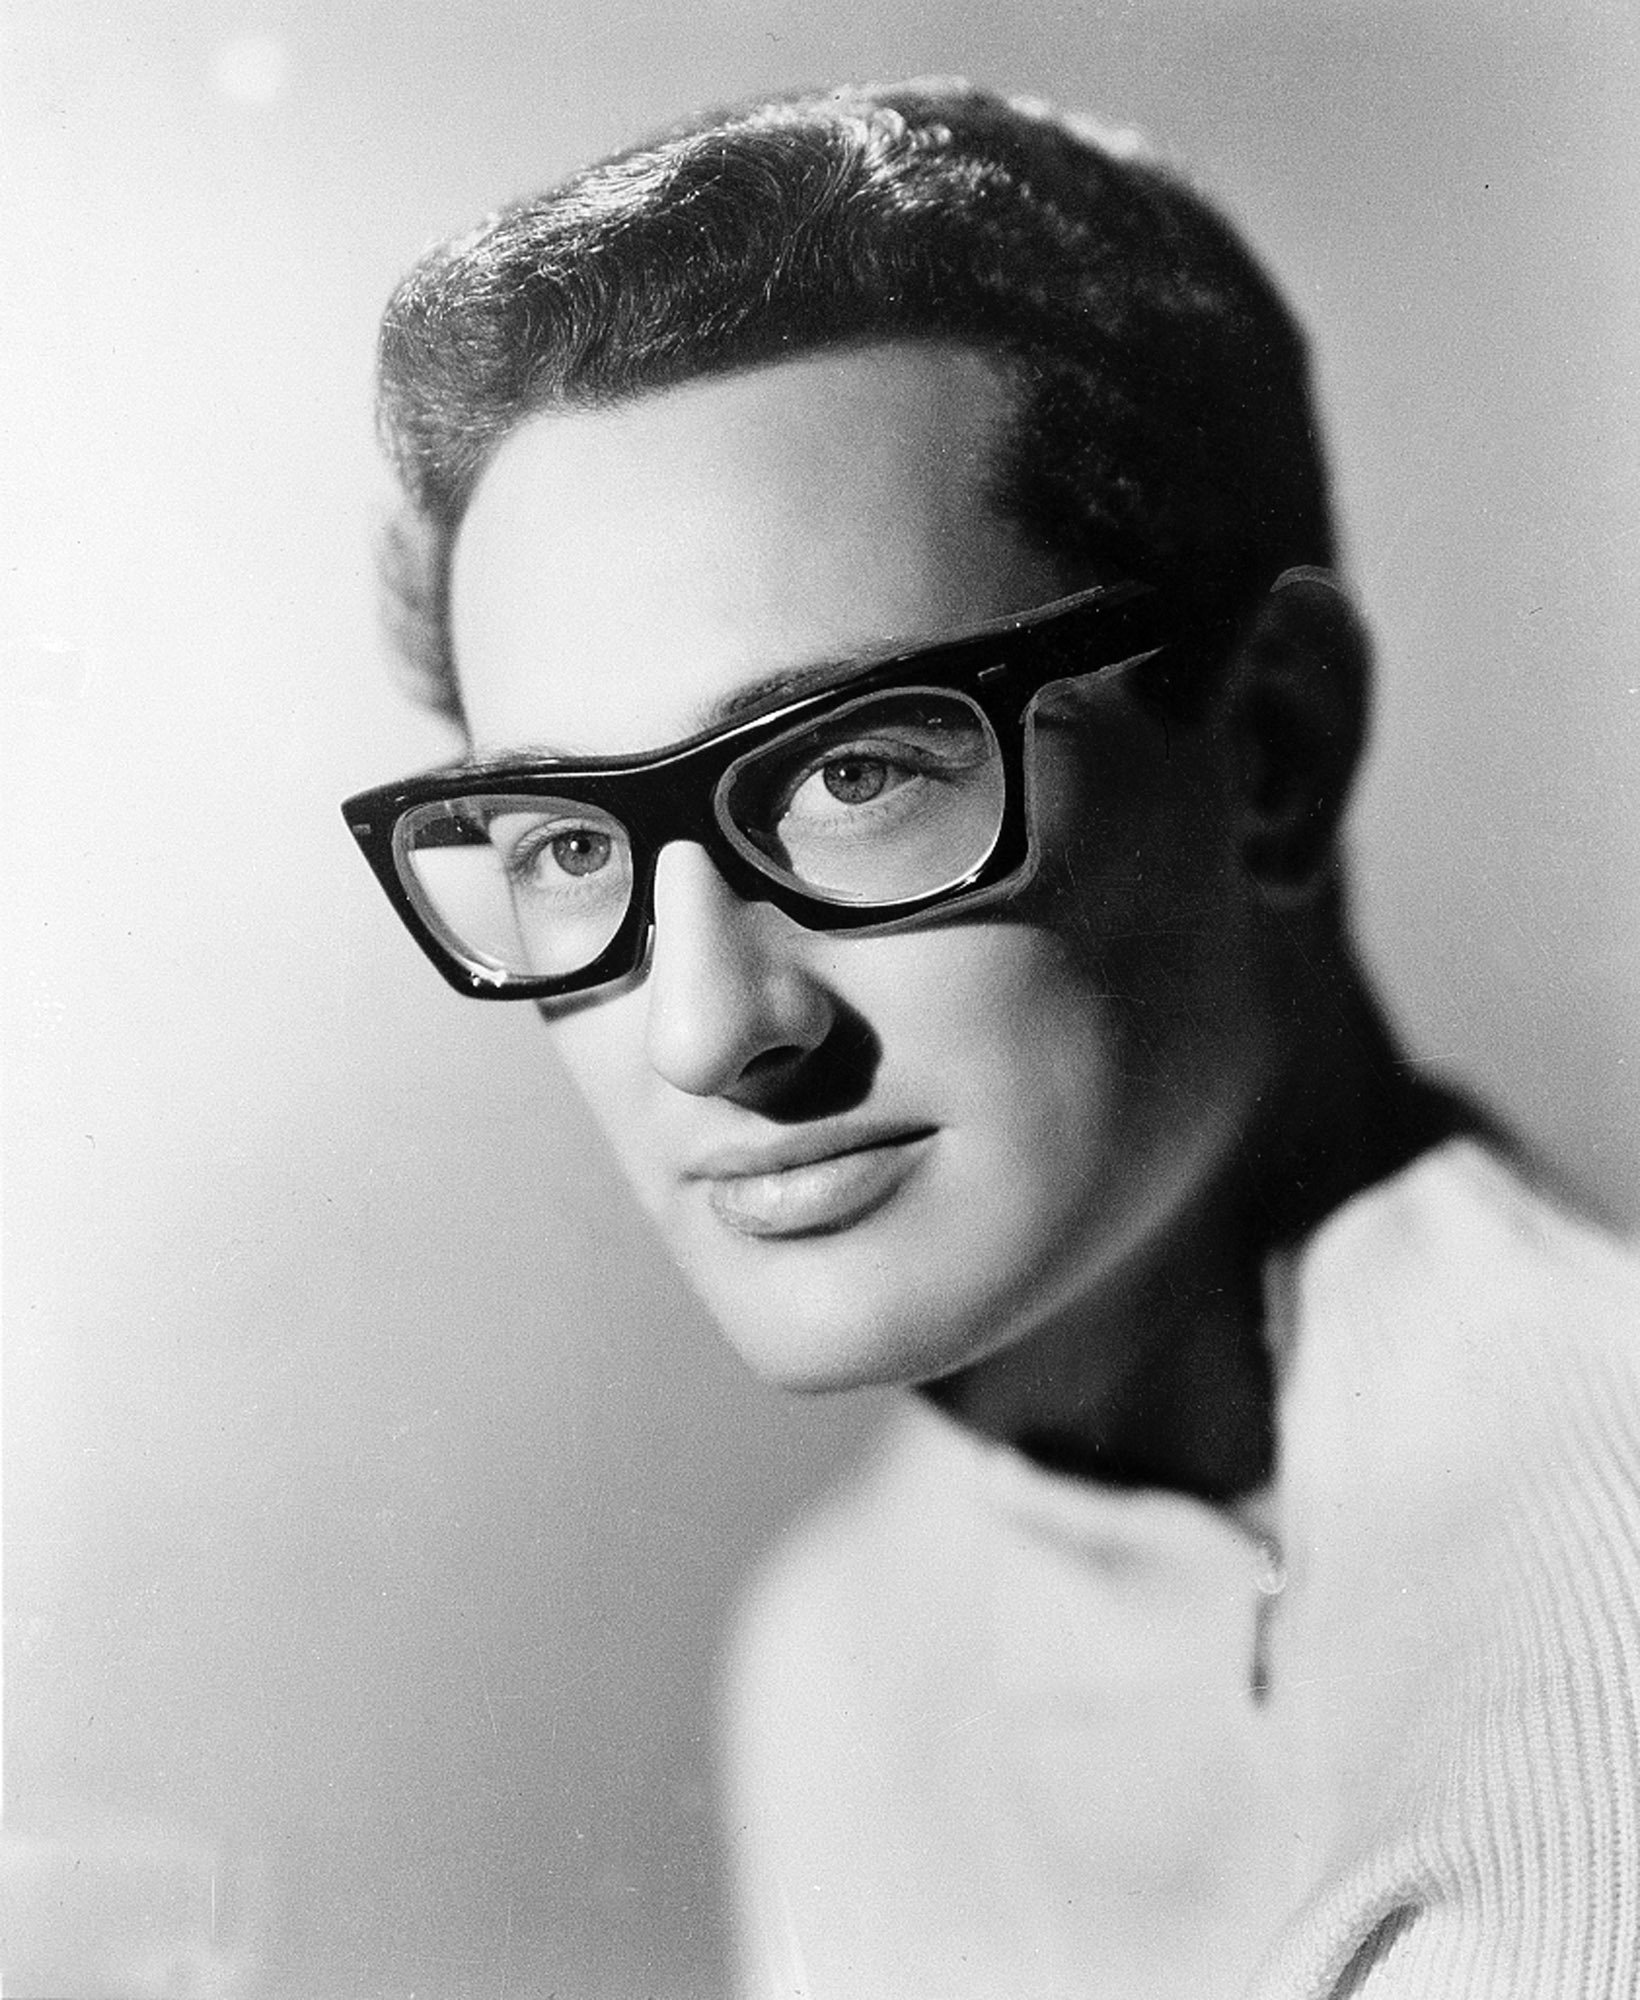 Harrowing buddy holly plane crash images show devastation of tragic accident that rocked music world years ago today the sun